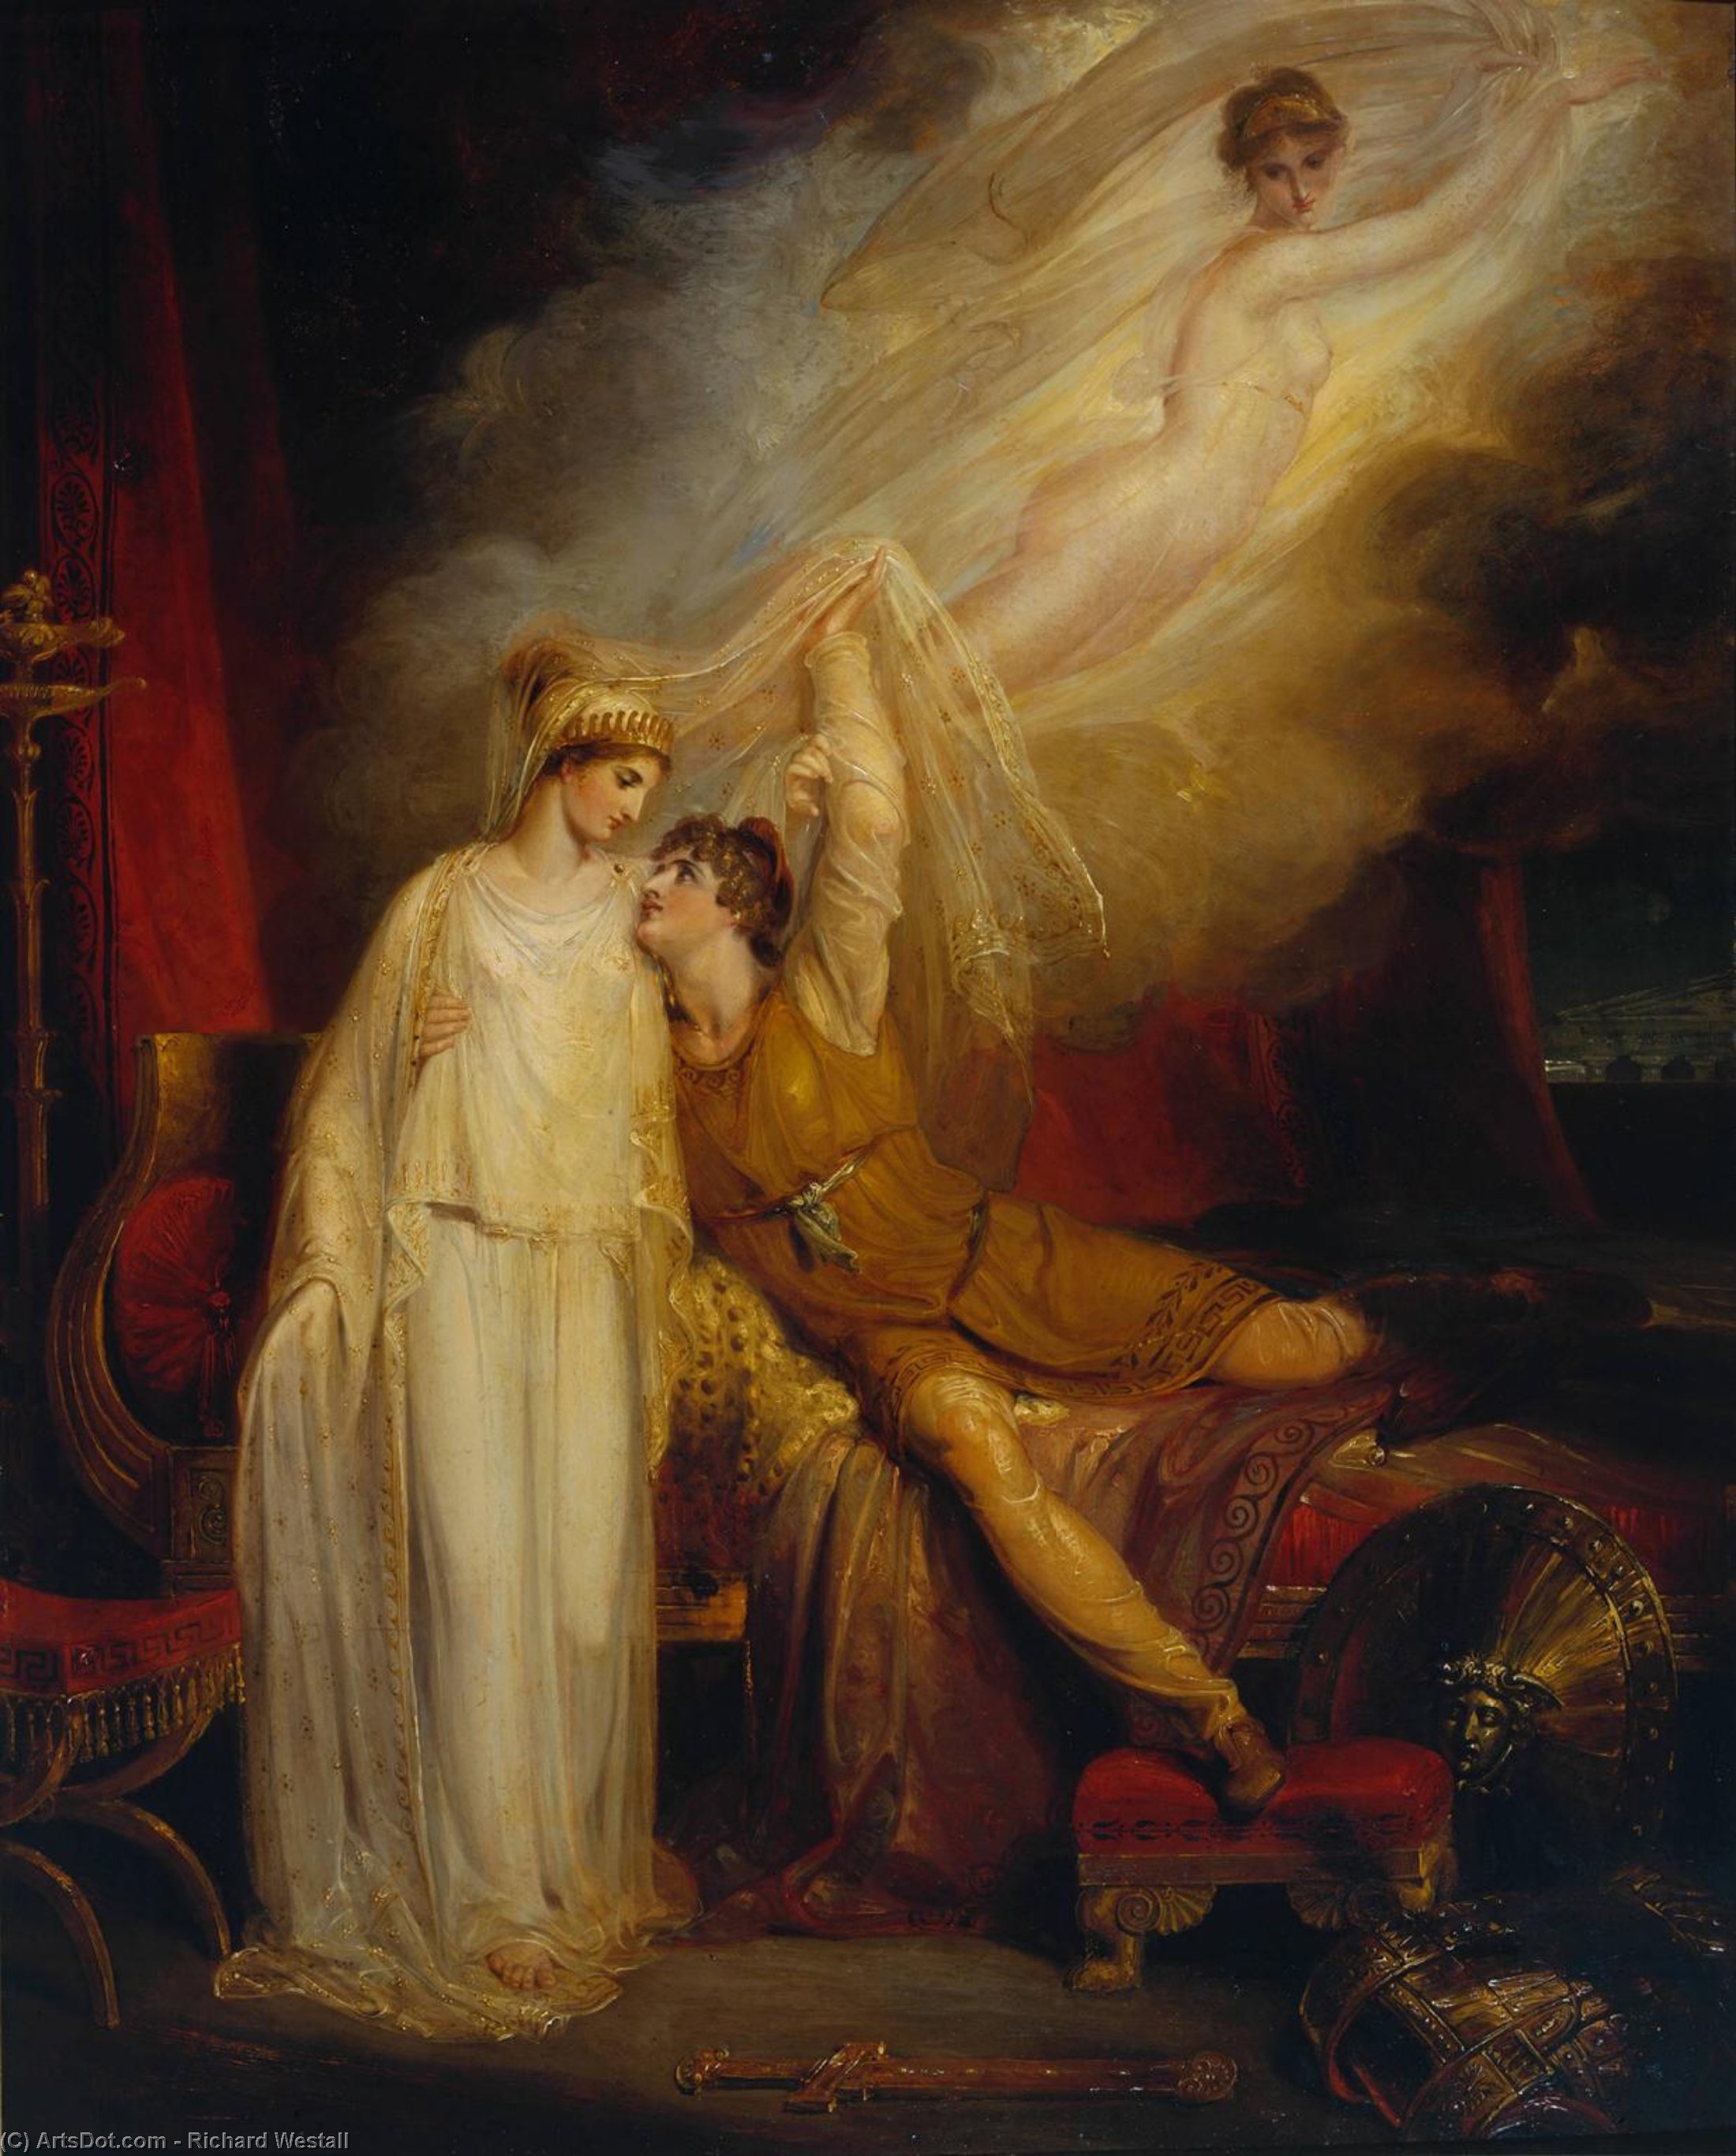 WikiOO.org - Encyclopedia of Fine Arts - Malba, Artwork Richard Westall - The Reconciliation Of Helen And Paris After His Defeat By Menelaus